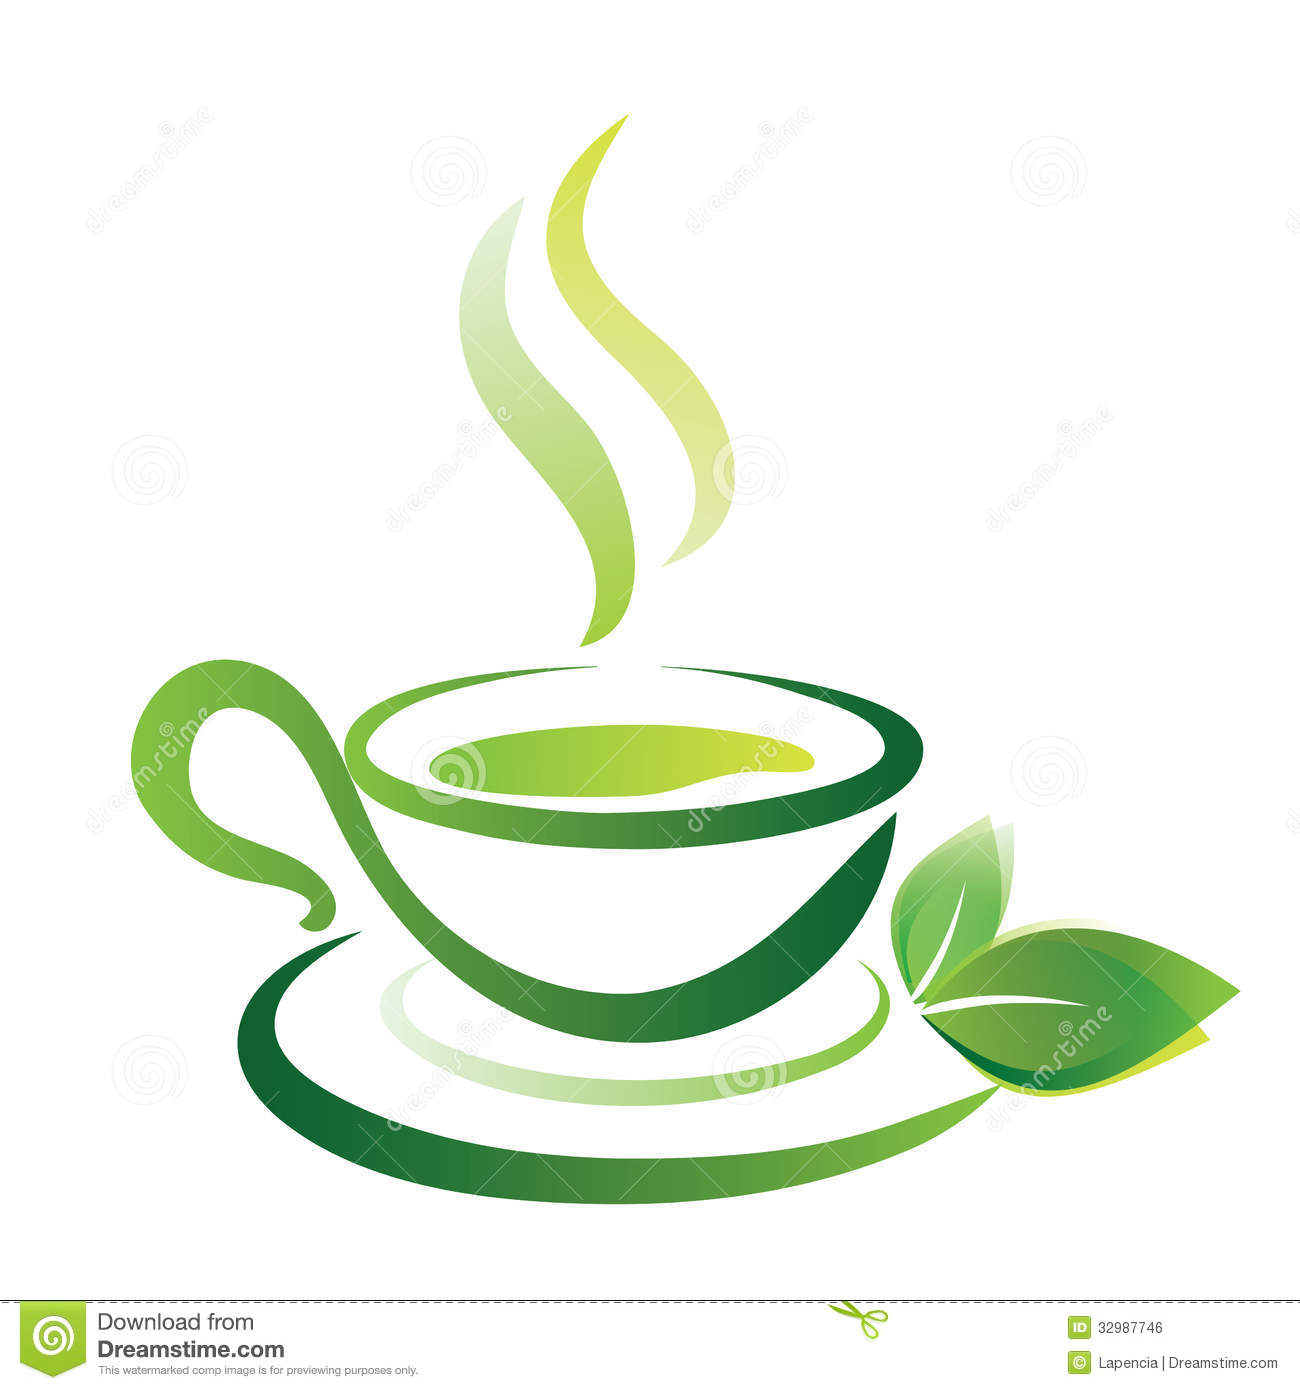 Sketch Of Green Tea Cup Icon Royalty Free Stock Image   Image